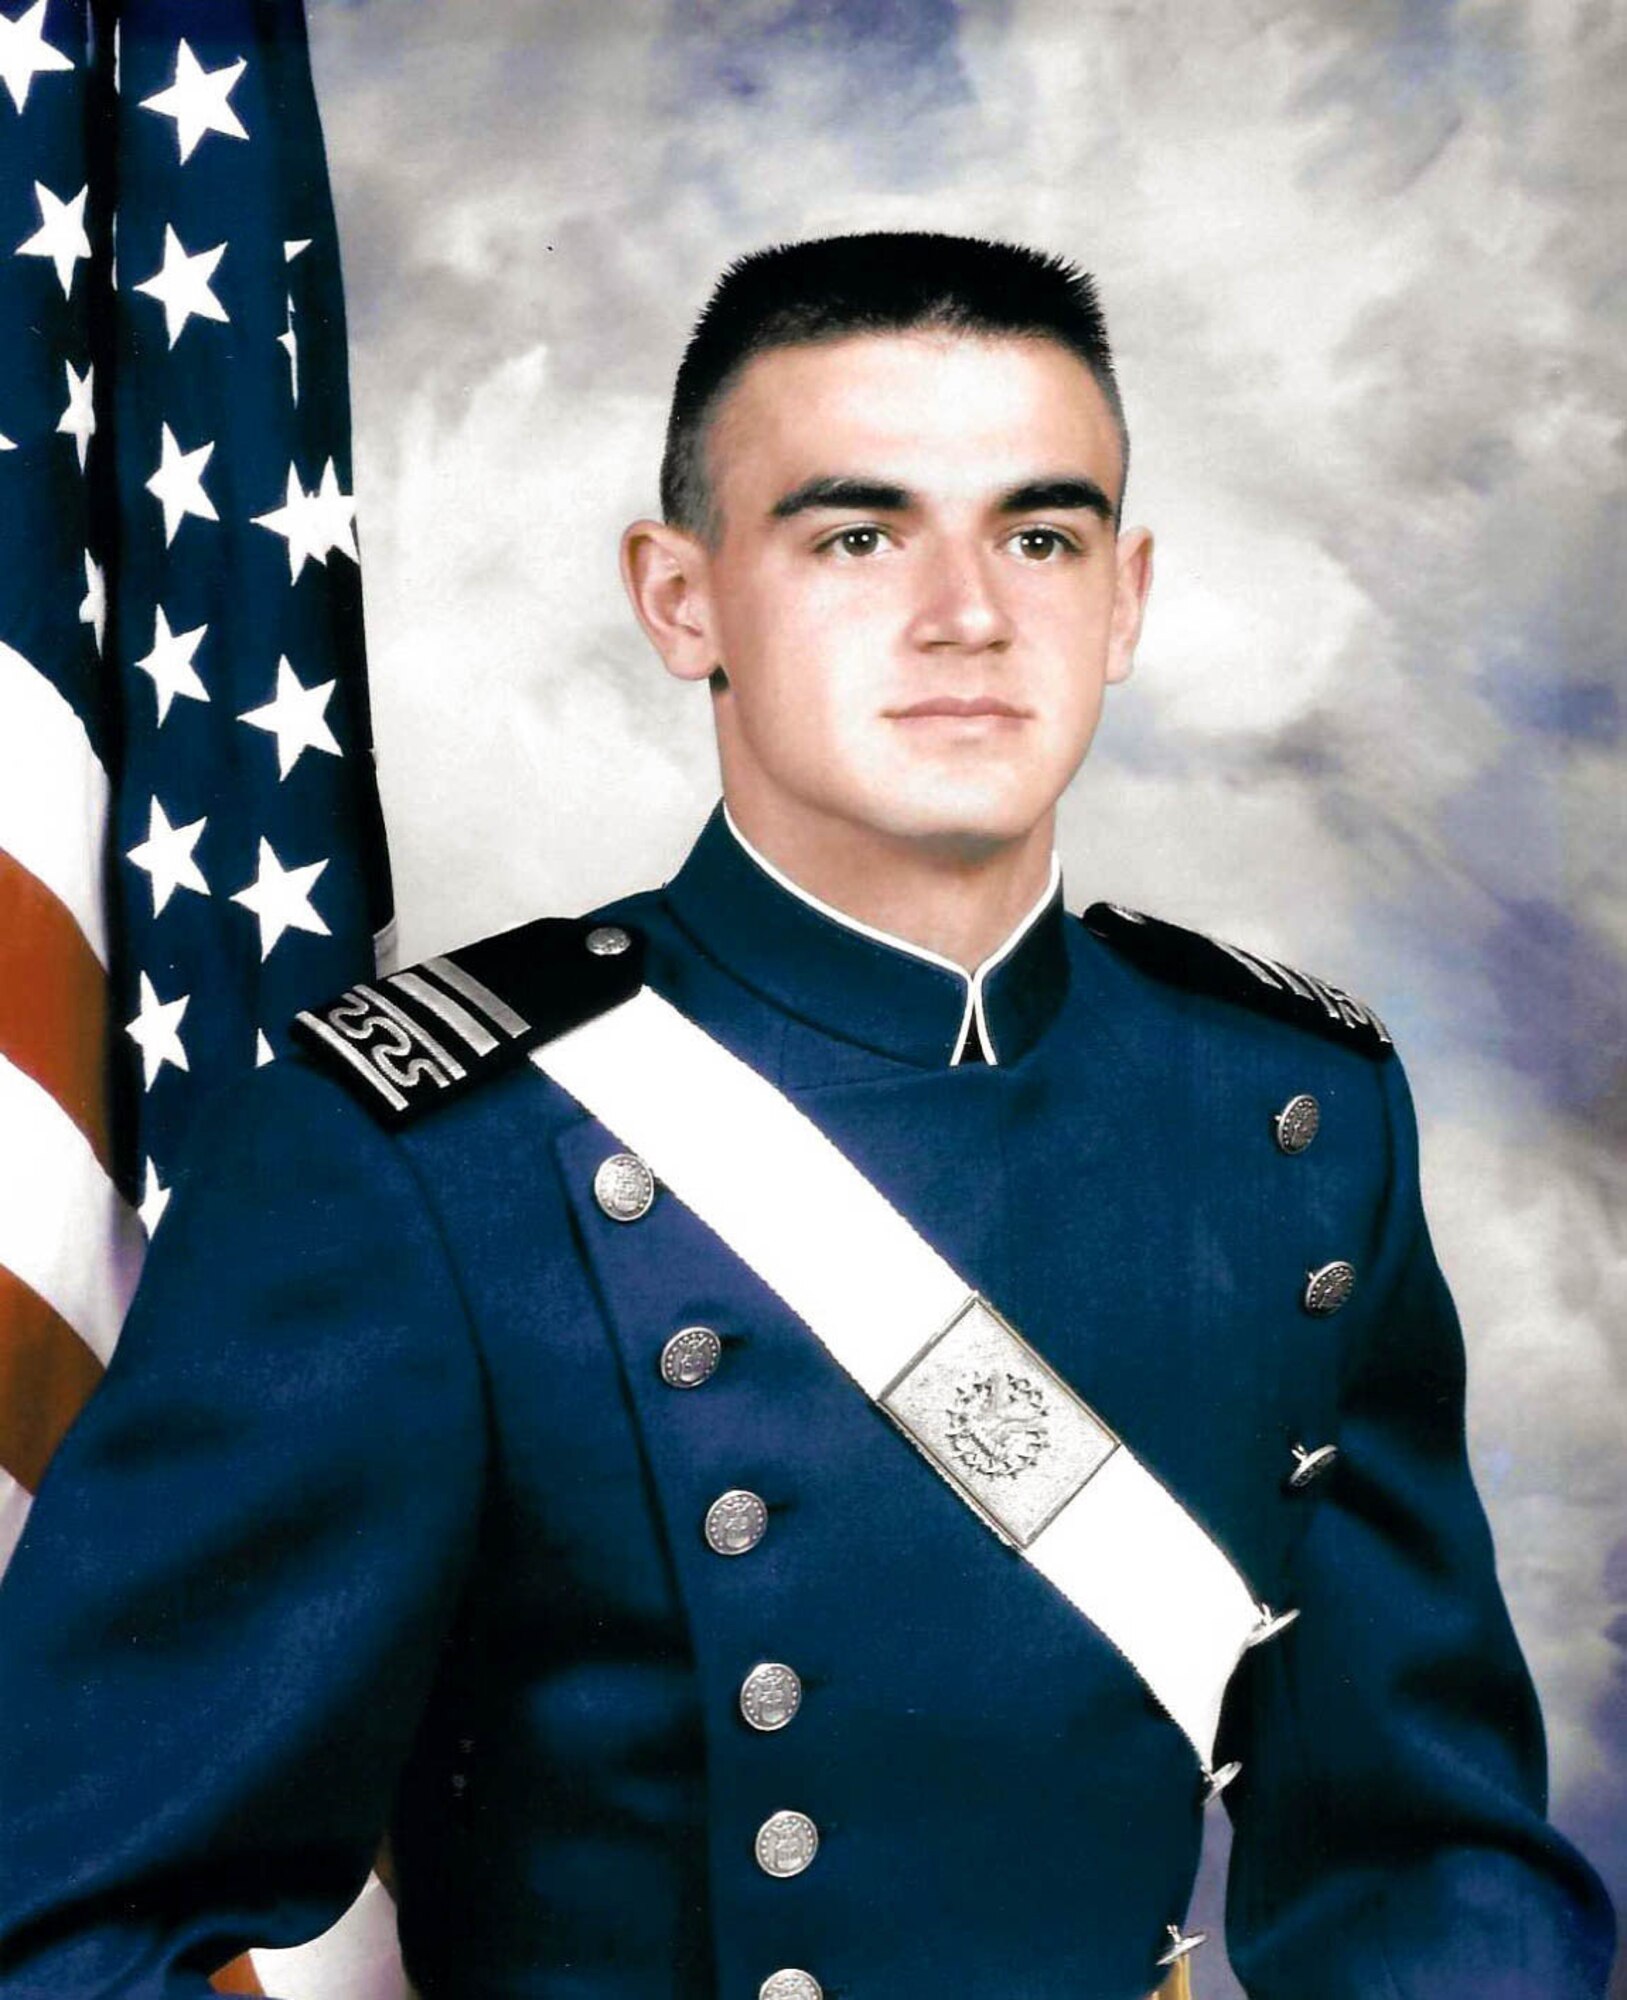 Col. Stuart Rubio, 403rd Wing commander, graduated from the Air Force Academy in 1998. In June 2021, his son Ashton departs to start his first year at the Academy and is scheduled to graduate in the class of 2025. (U.S. Air Force courtesy photo)